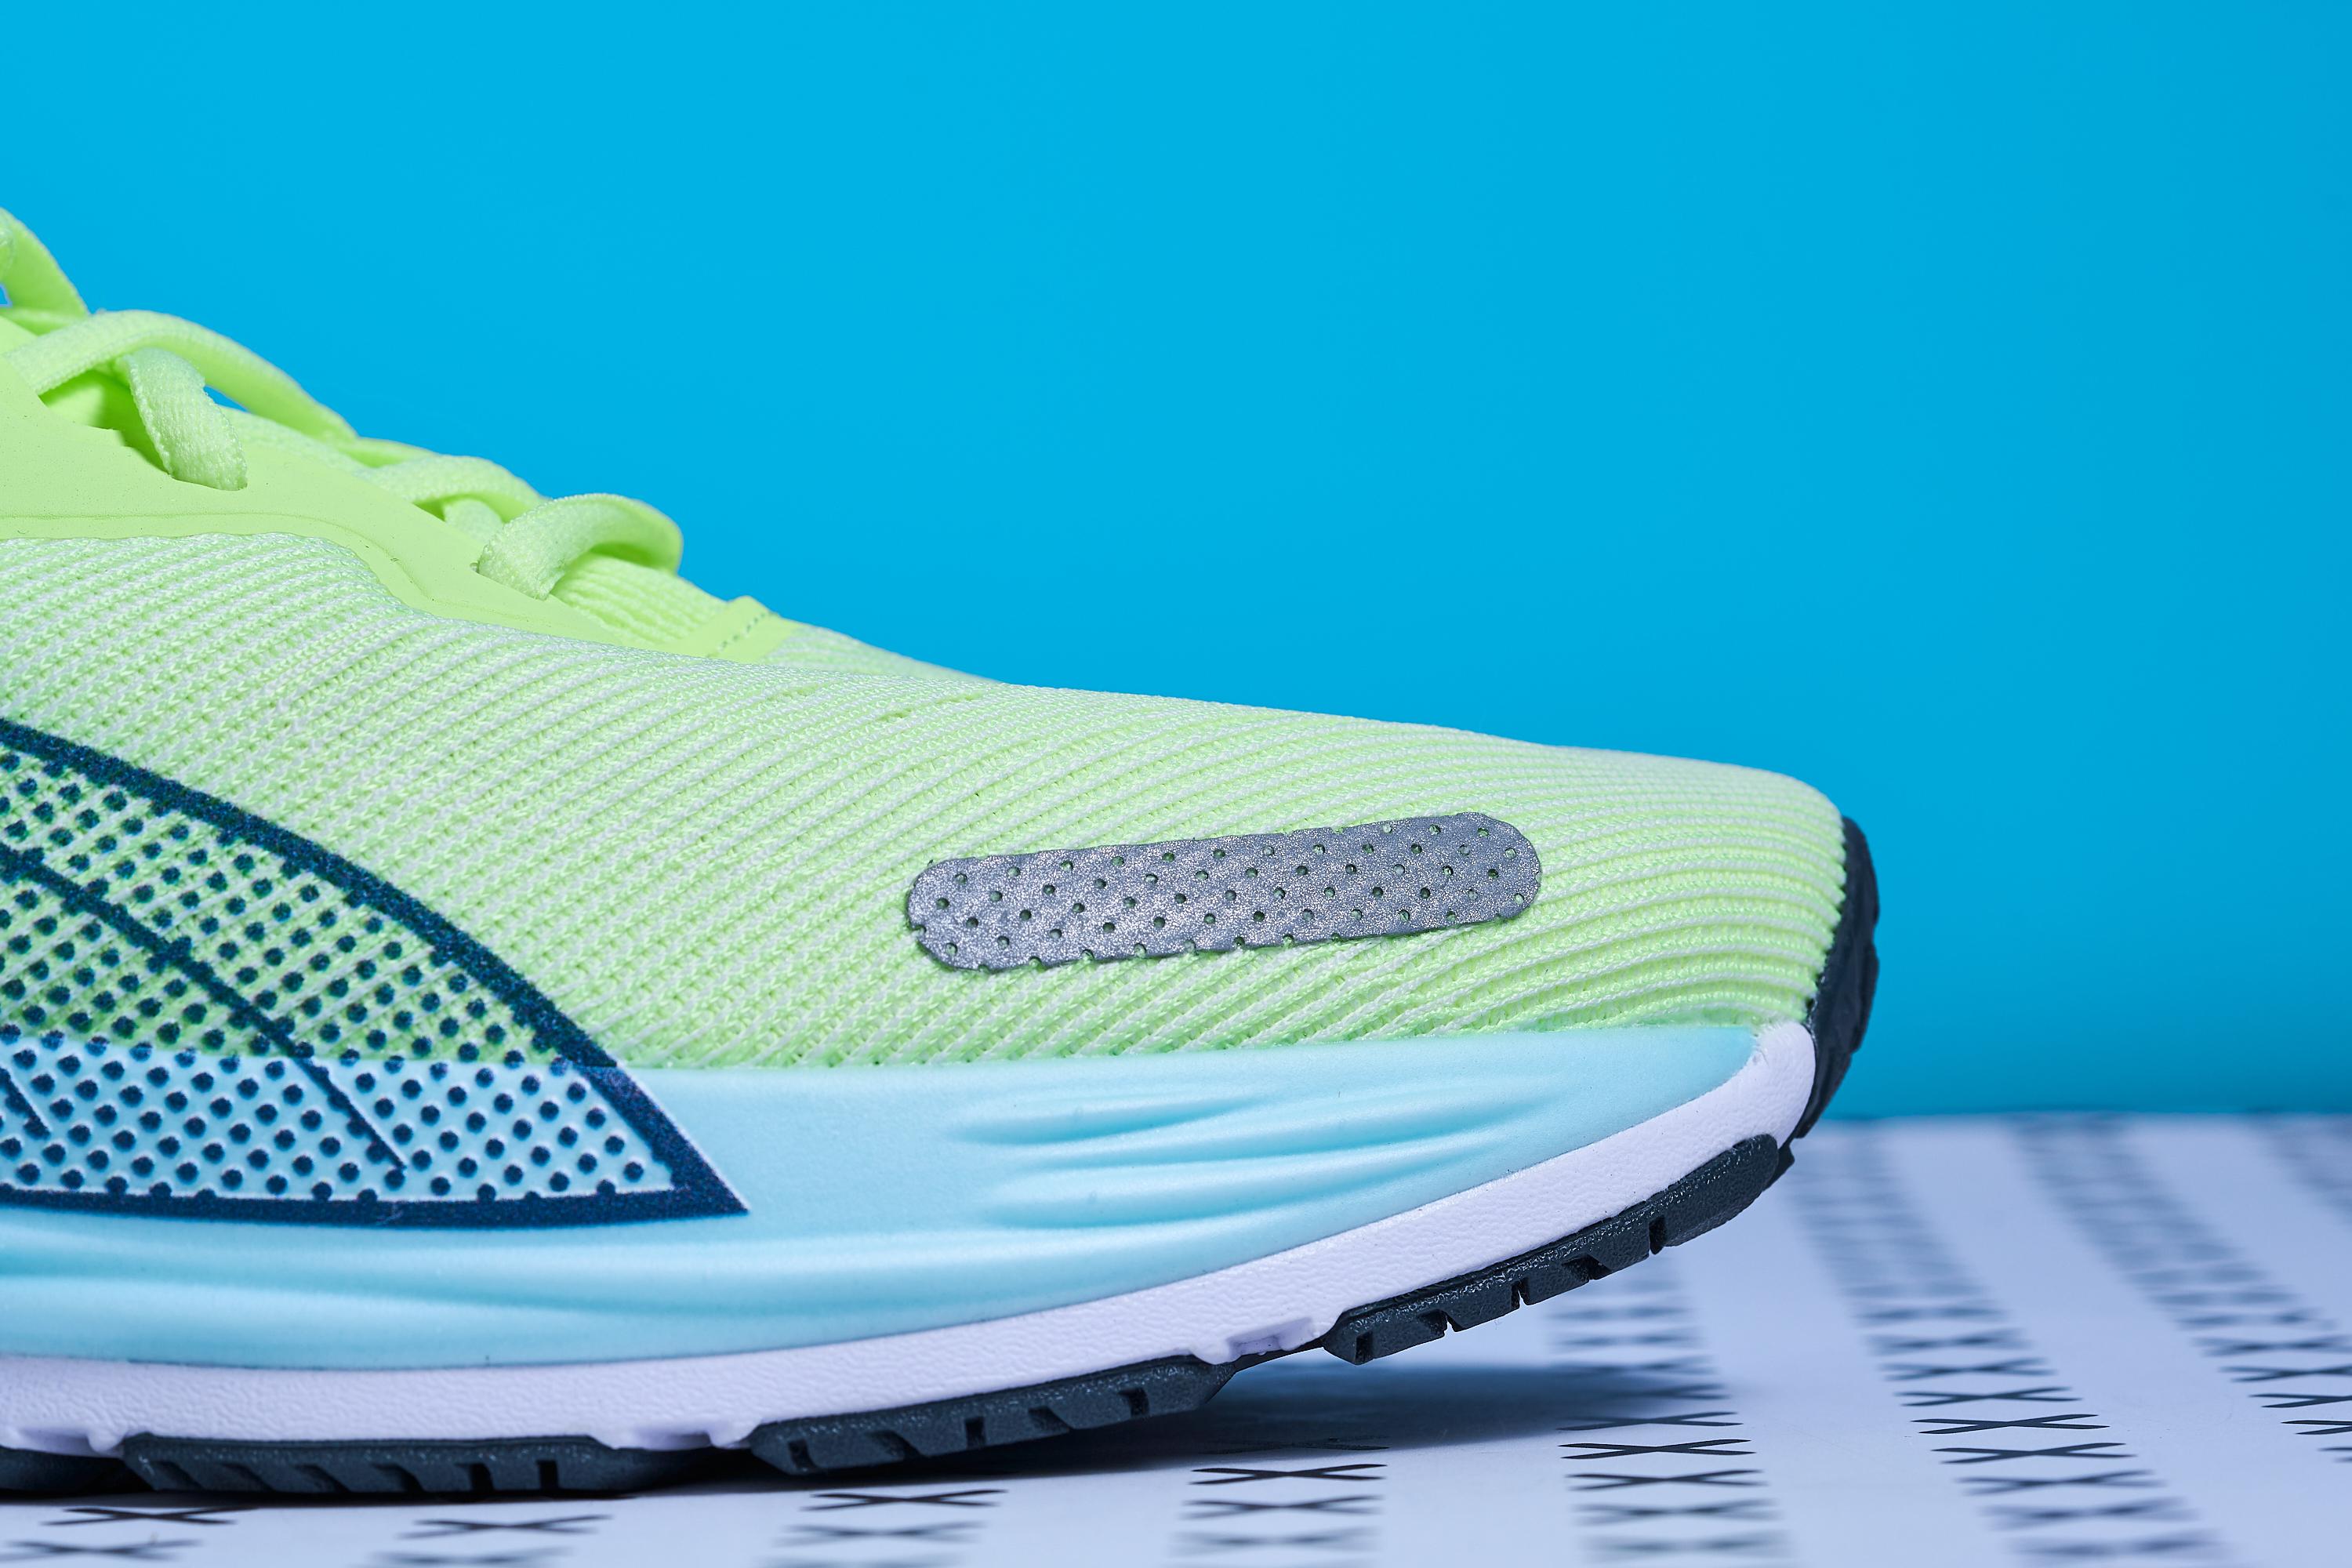 Review: Puma Velocity Nitro 2 Running Shoes — A Bright Step